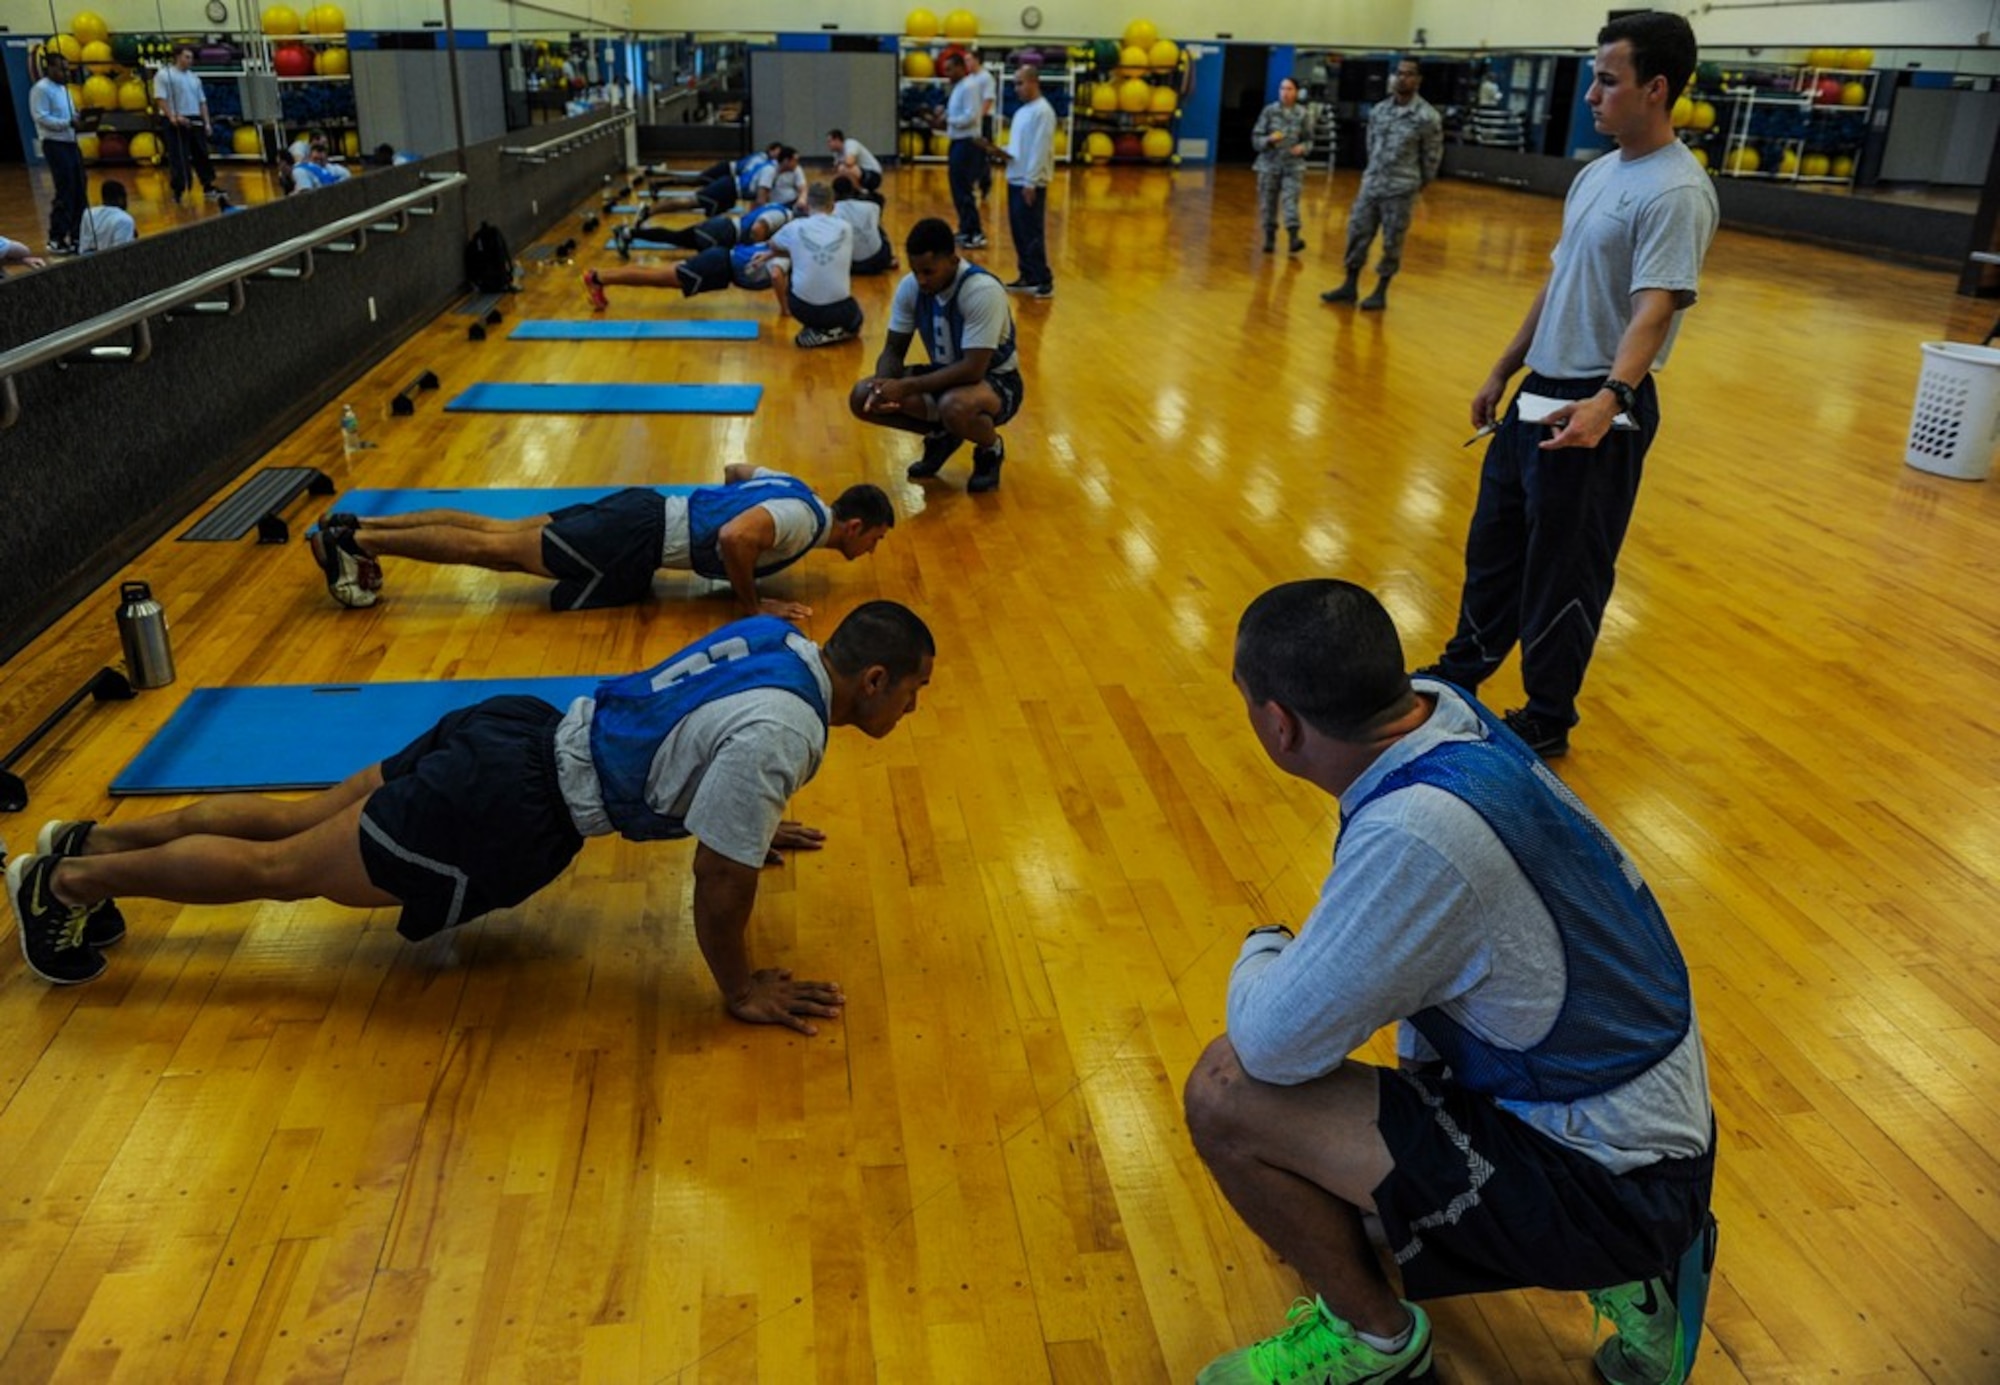 U.S. Air Force Airmen perform the push up portion of the physical fitness test, Dec. 1, 2016, at the Risner Fitness Center on Kadena Air Base, Japan. Proper physical fitness is an integral part of the fit-to-fight mentality as well as part of a healthy lifestyle.